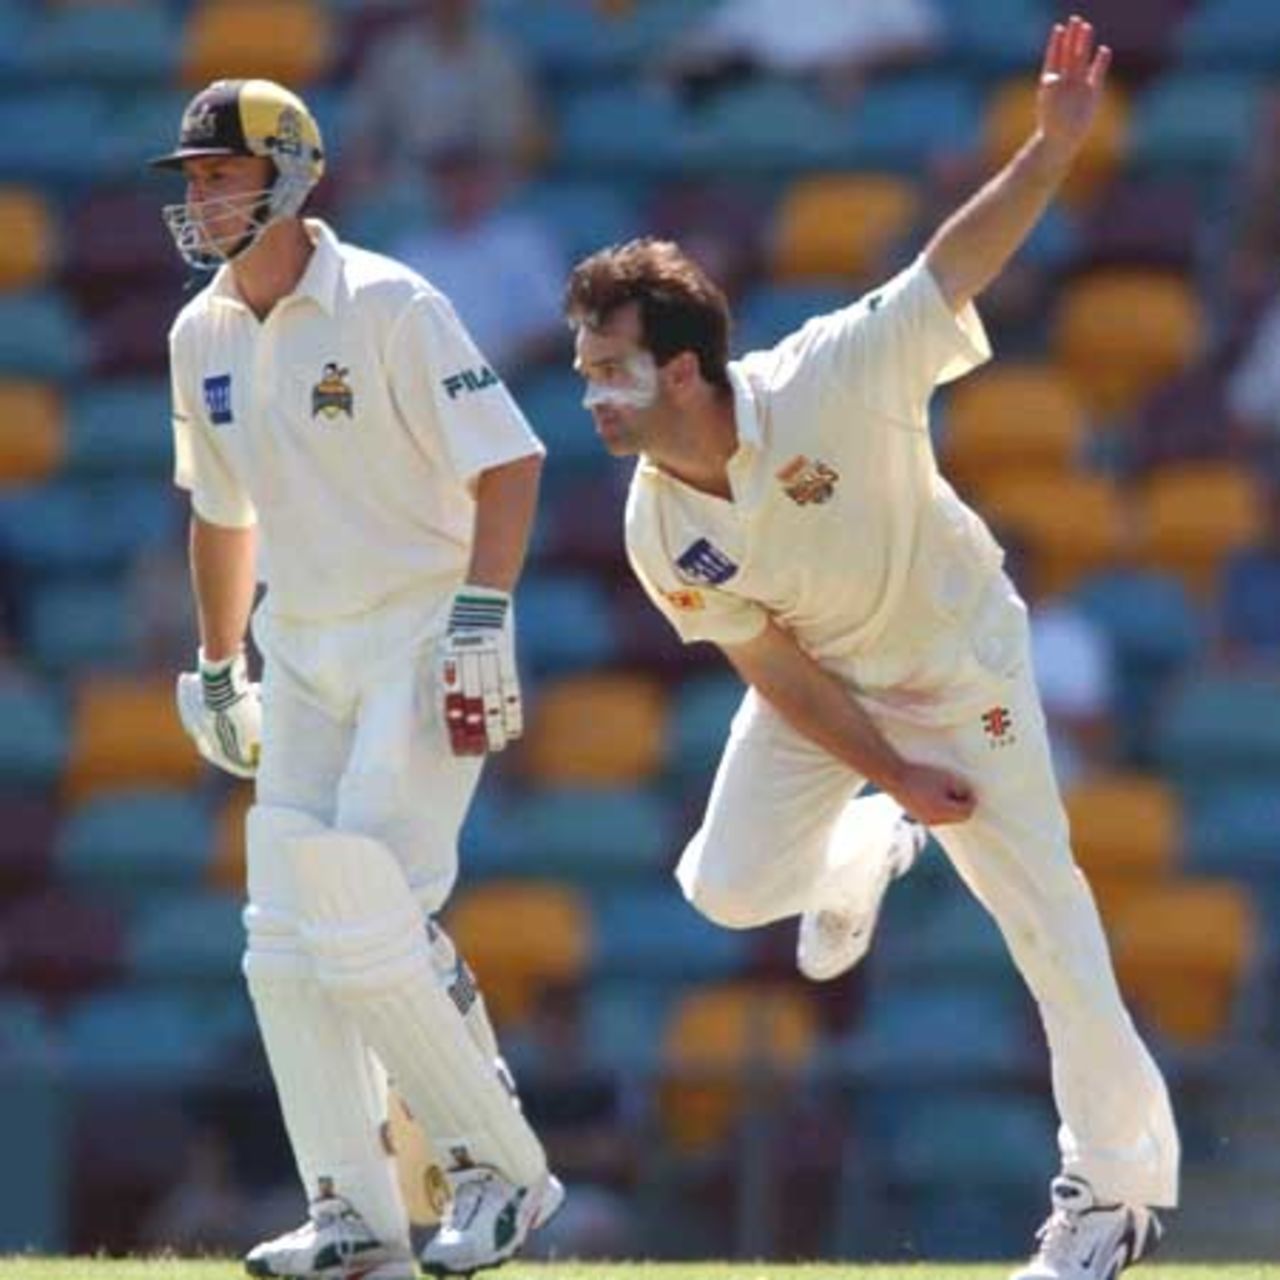 18 Oct 2001: Adam Dale of Queensland in action bowling while Adam Gilchrist of Western Australia looks on during the Pura Cup cricket match between Queensland and Western Australia which is being played at the Gabba in Brisbane, Australia.